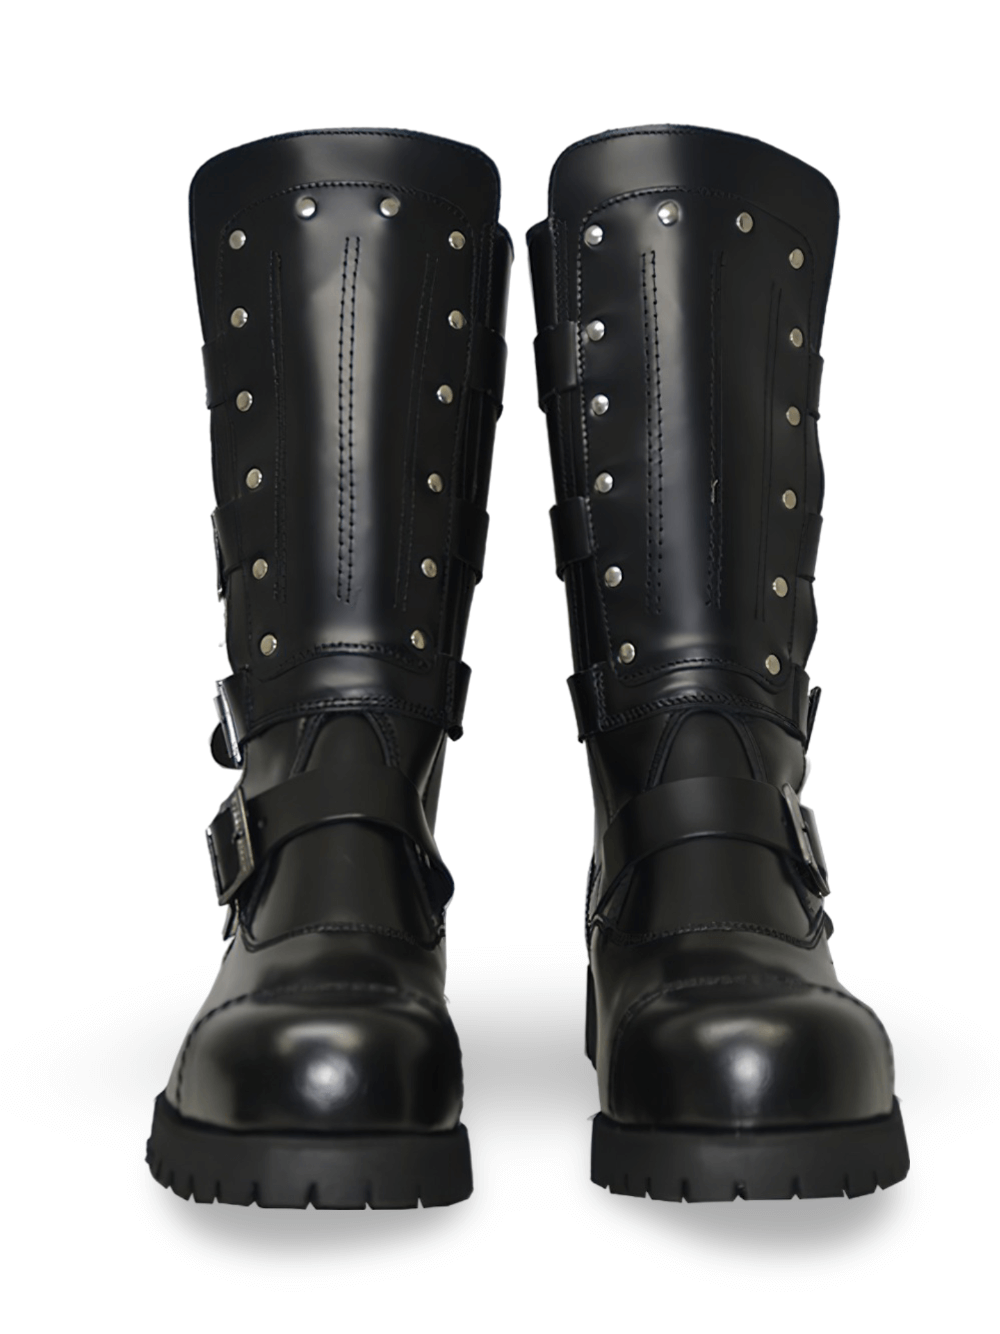 Black Rugged Steel Cap Leather Boots with Buckles